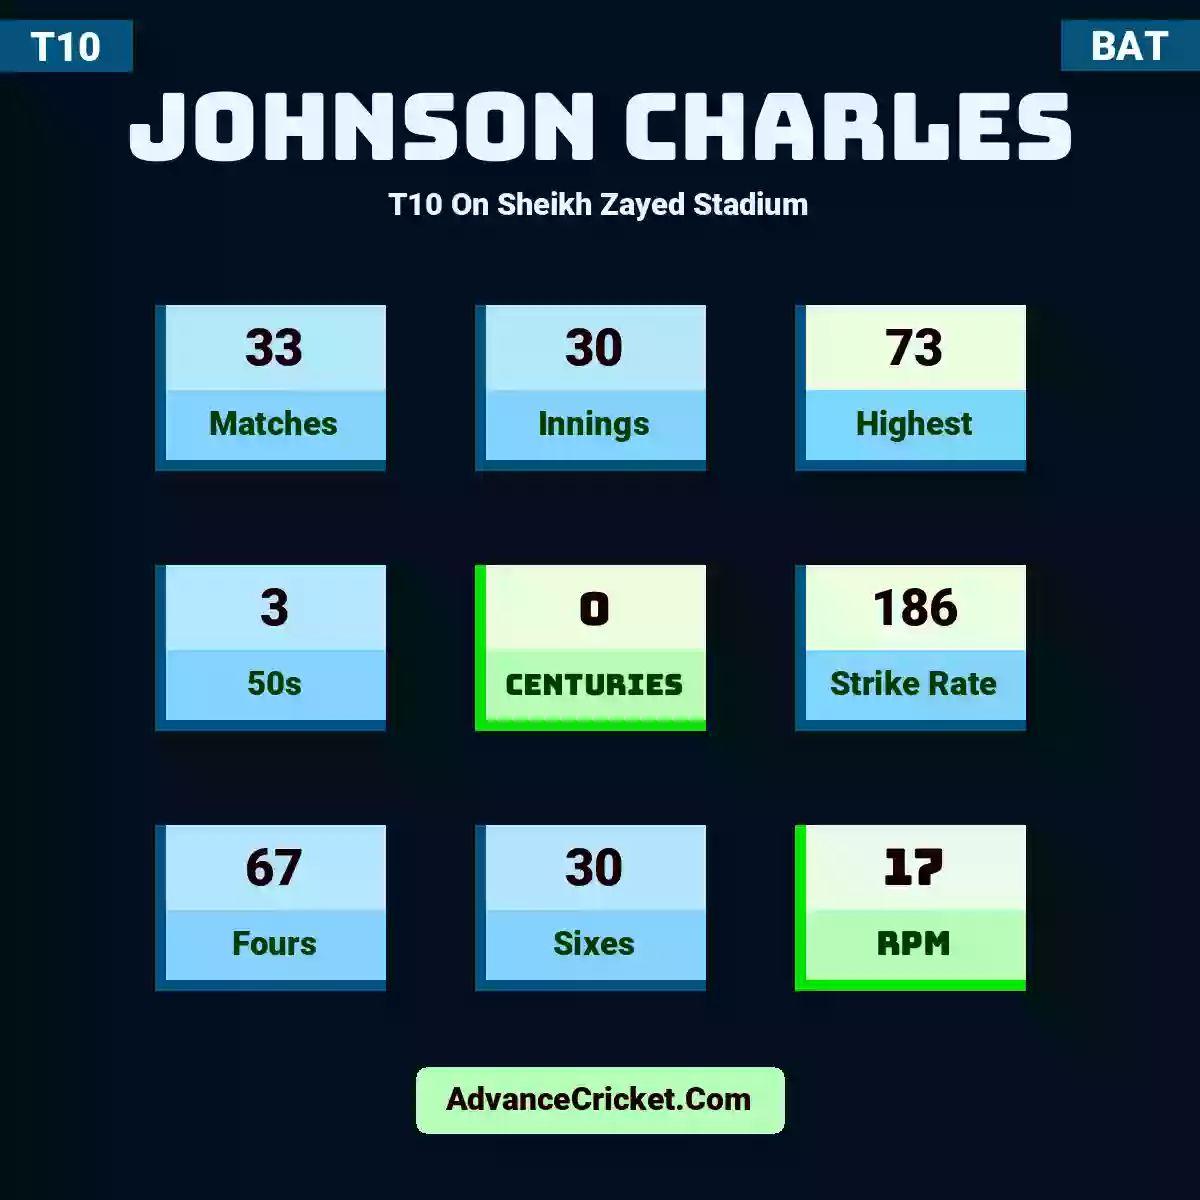 Johnson Charles T10  On Sheikh Zayed Stadium, Johnson Charles played 33 matches, scored 73 runs as highest, 3 half-centuries, and 0 centuries, with a strike rate of 186. J.Charles hit 67 fours and 30 sixes, with an RPM of 17.